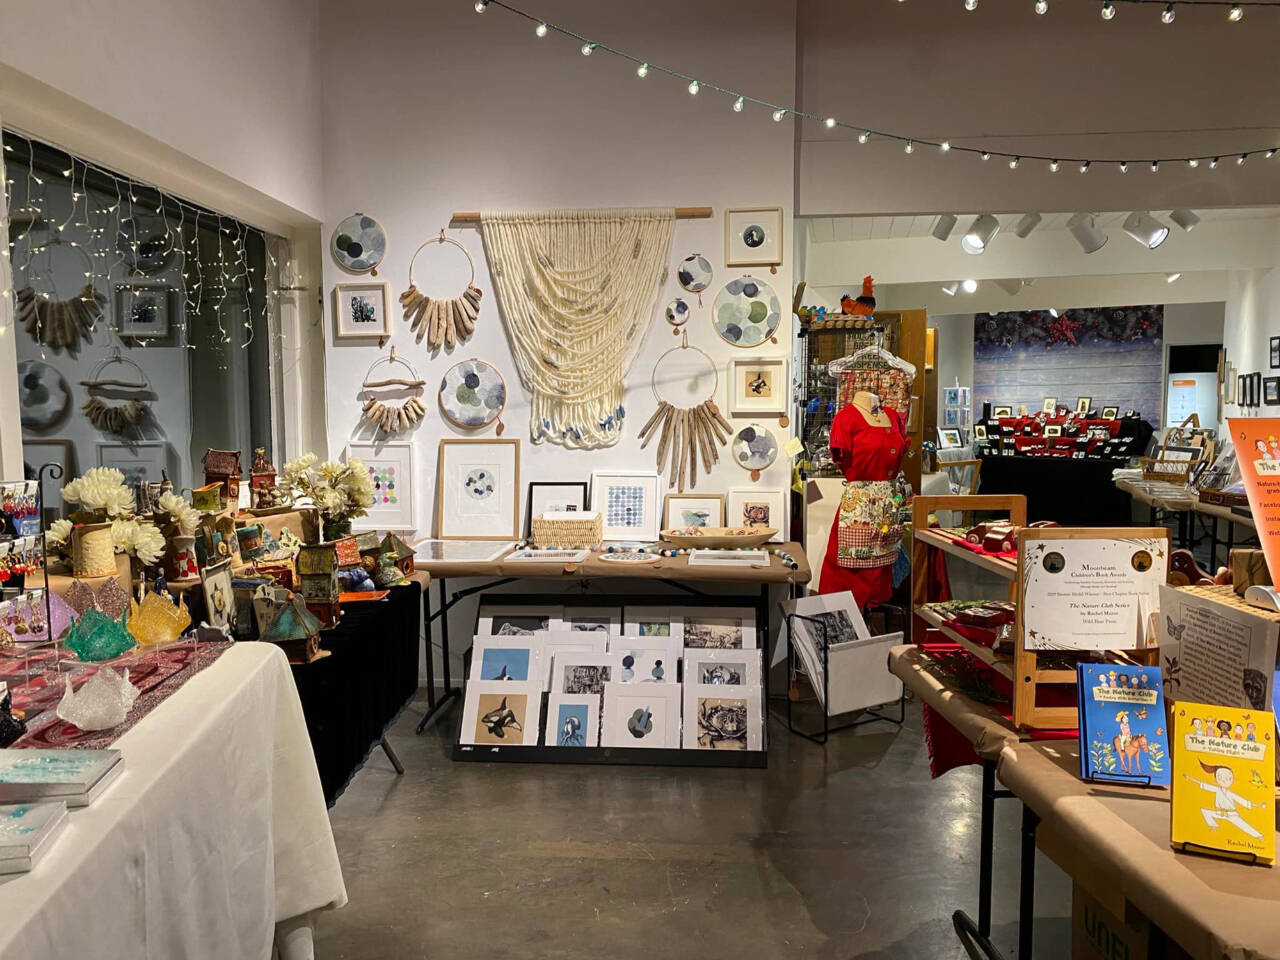 Photo courtesy of Port Angeles Fine Arts Center / The Port Angeles Fine Arts Center hosts a Maker’s Market each year. Organizers are accepting applications for the 2022 market, set for Nov. 21-Dec. 18.